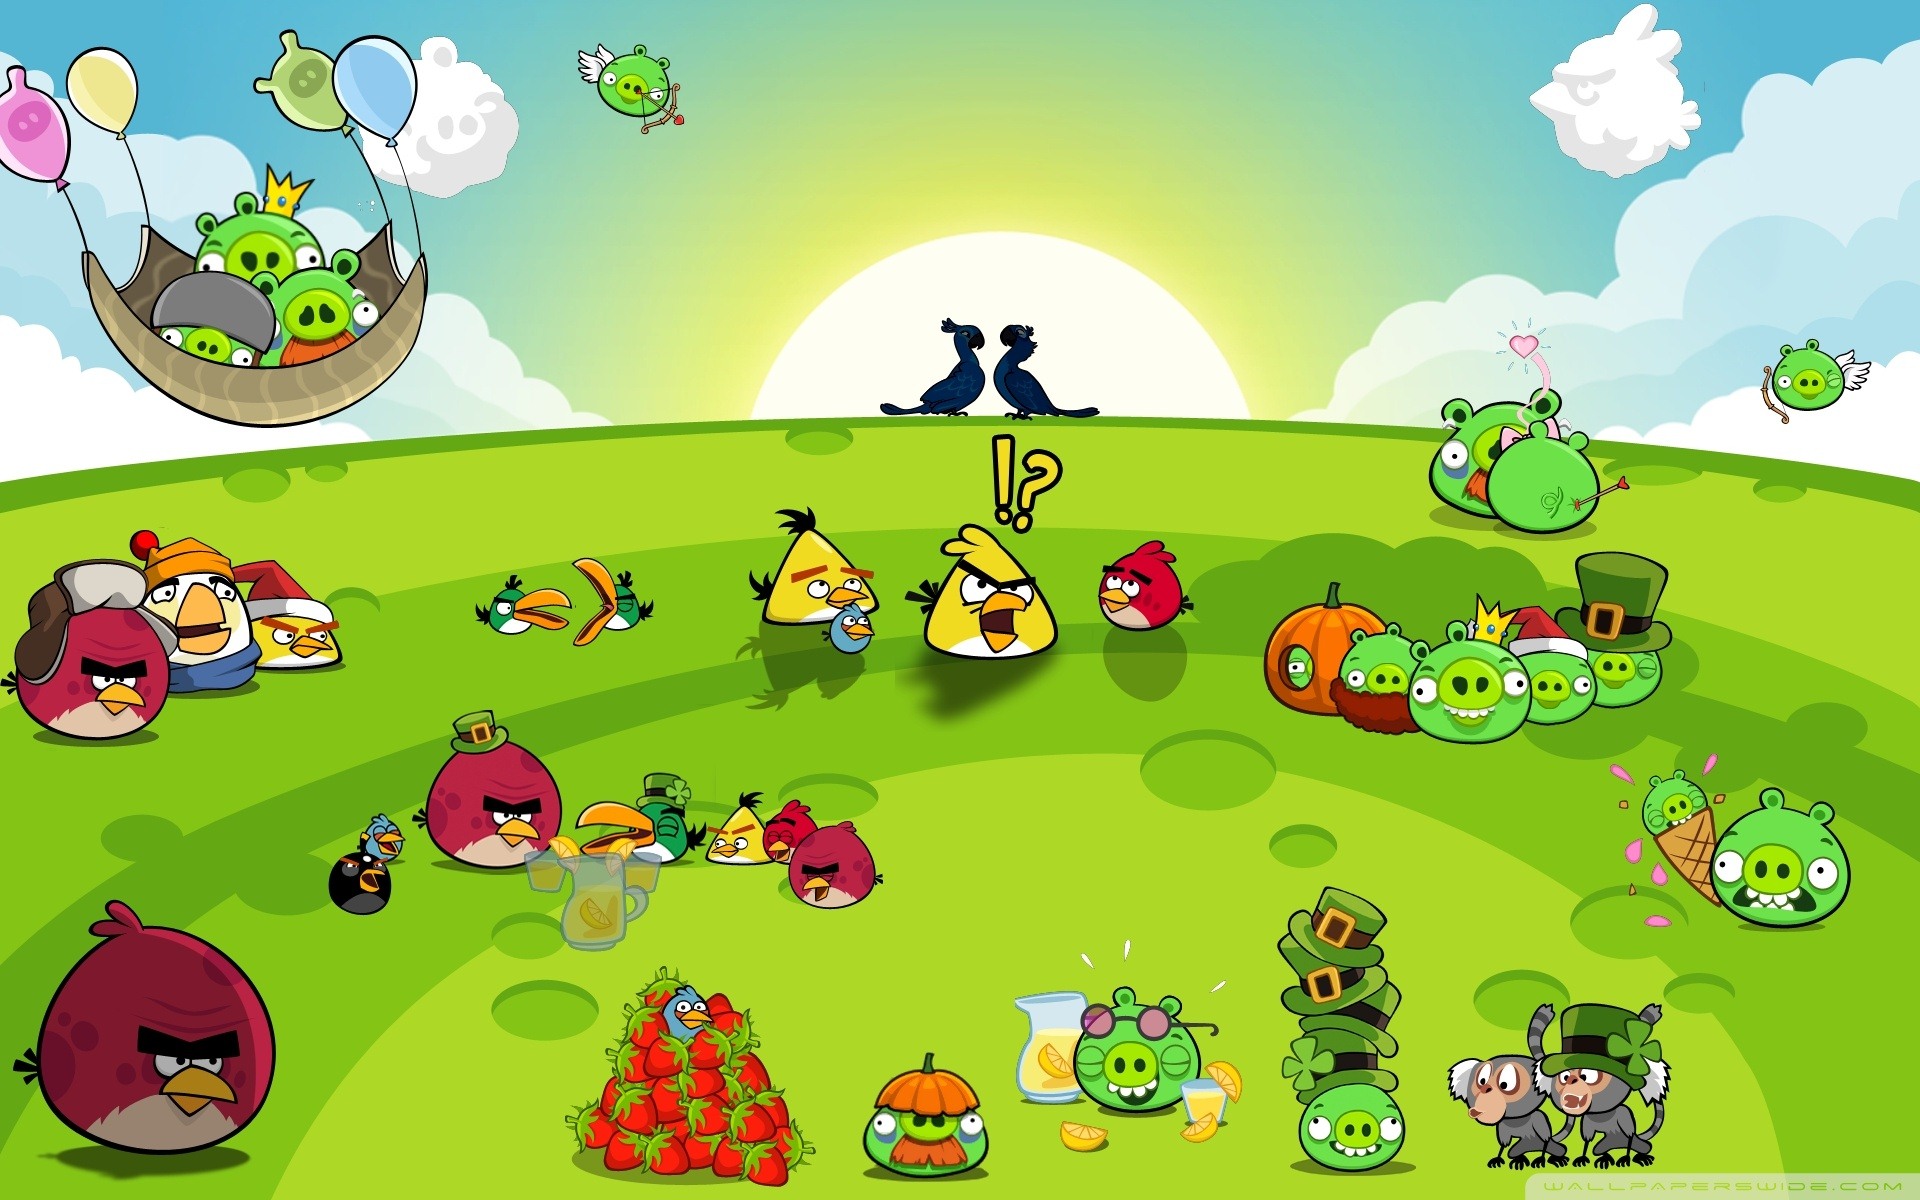 Angry Birds Spiel wallpapers #11 - 1920x1200